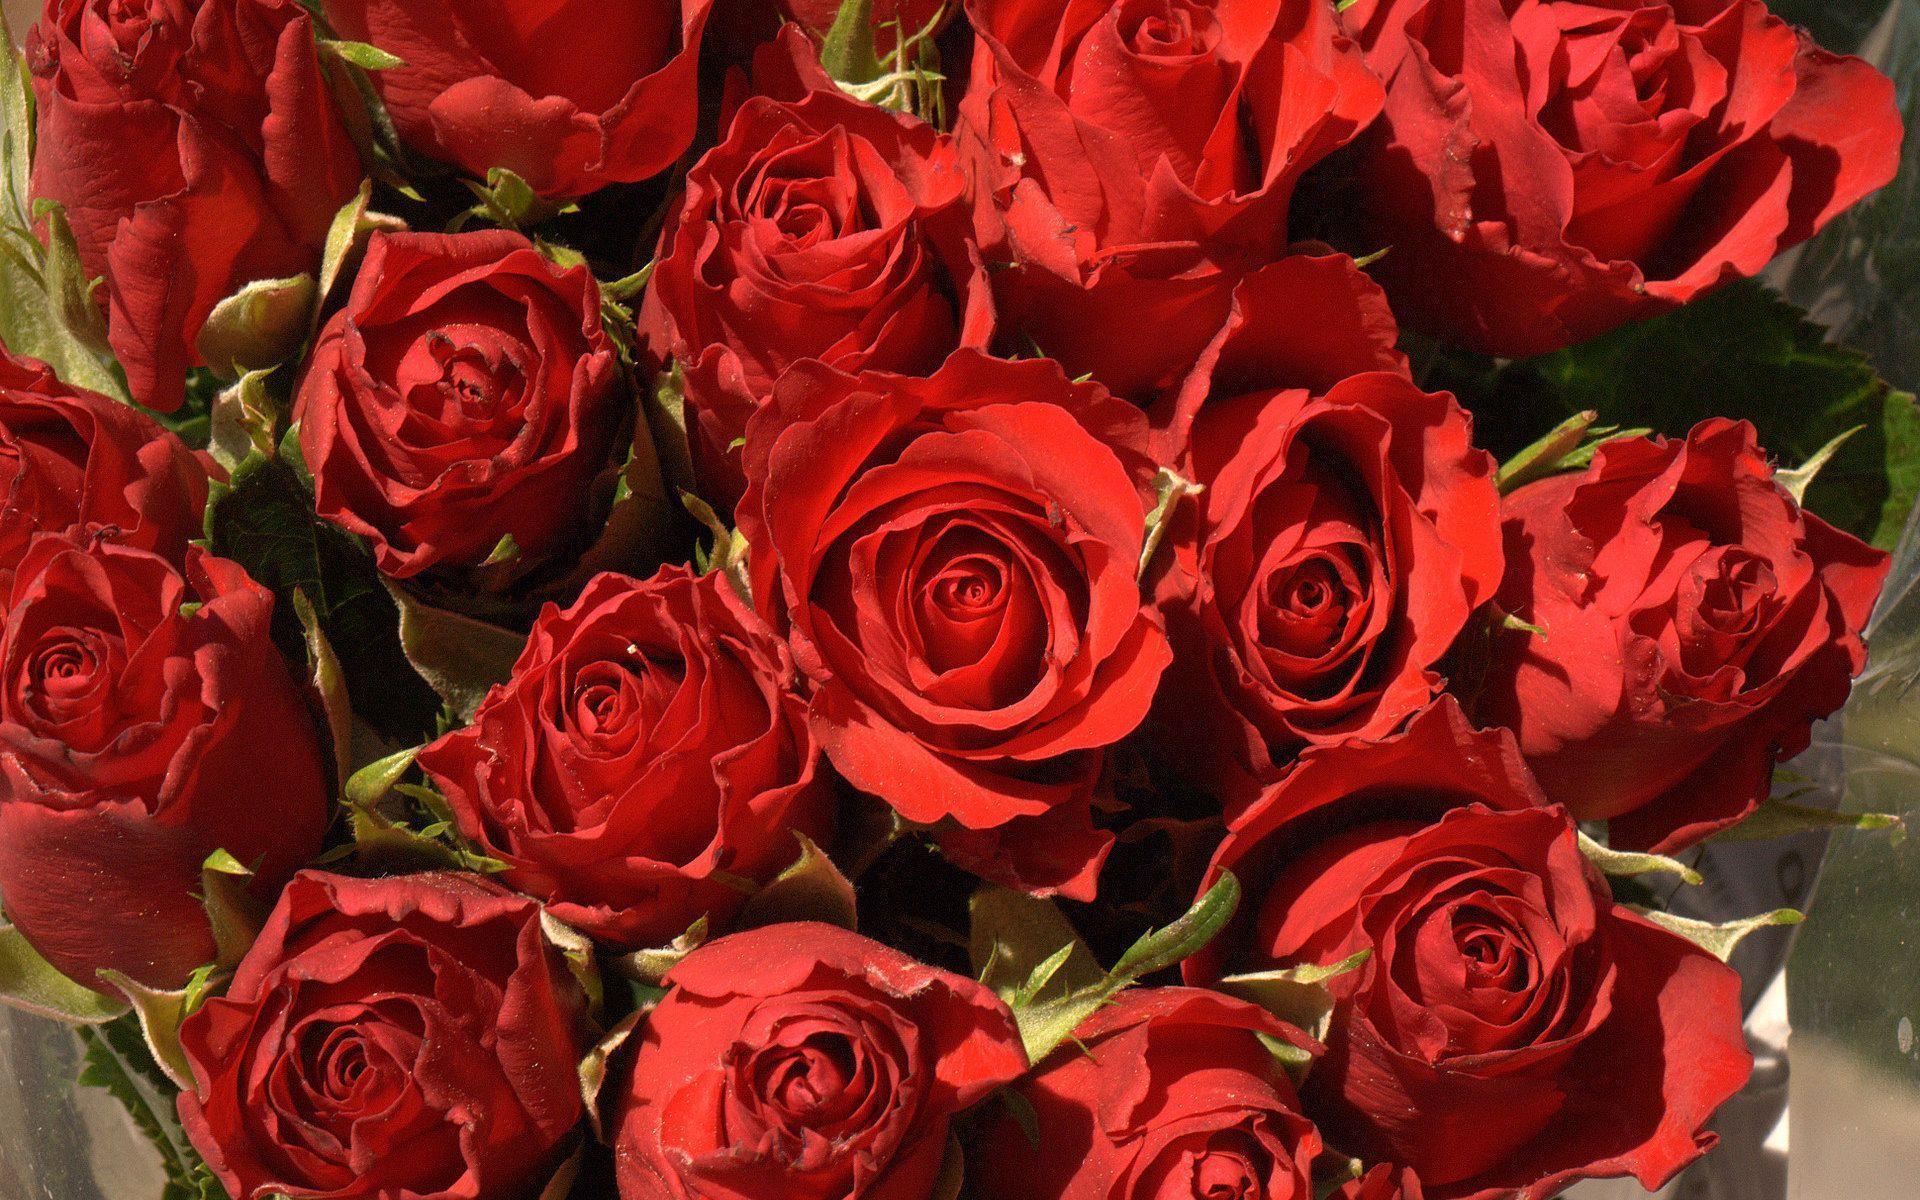 Fresh Red Roses Flowers HD Wallpaper Download Flower 1920x1080PX